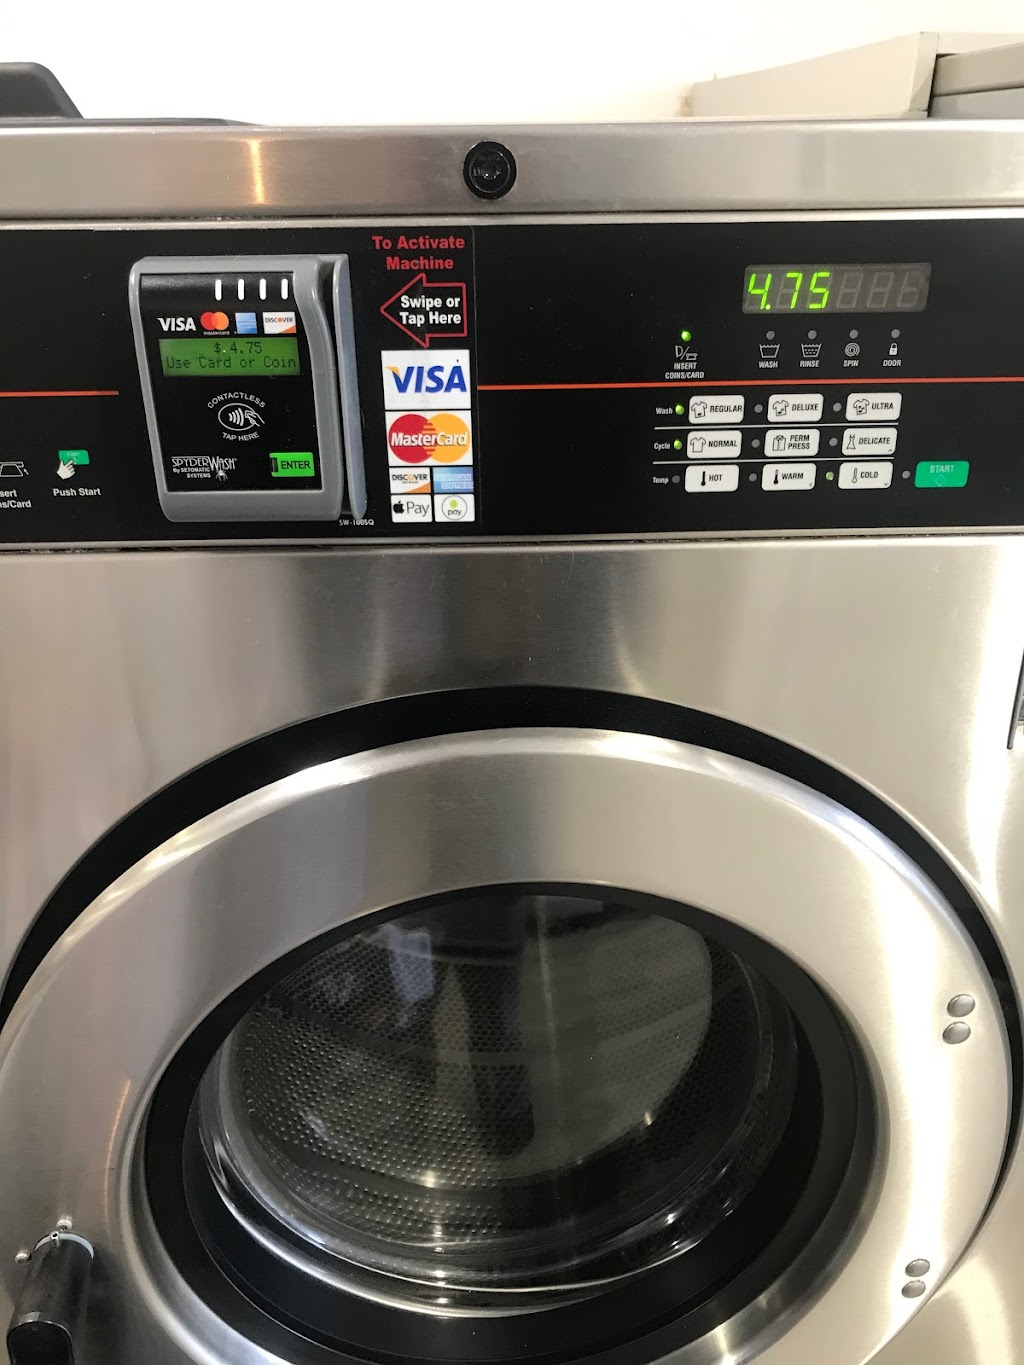 Ultra coin 2 laundromat | 1118 N Colony Rd, Wallingford, CT 06492 | Phone: (203) 623-9621